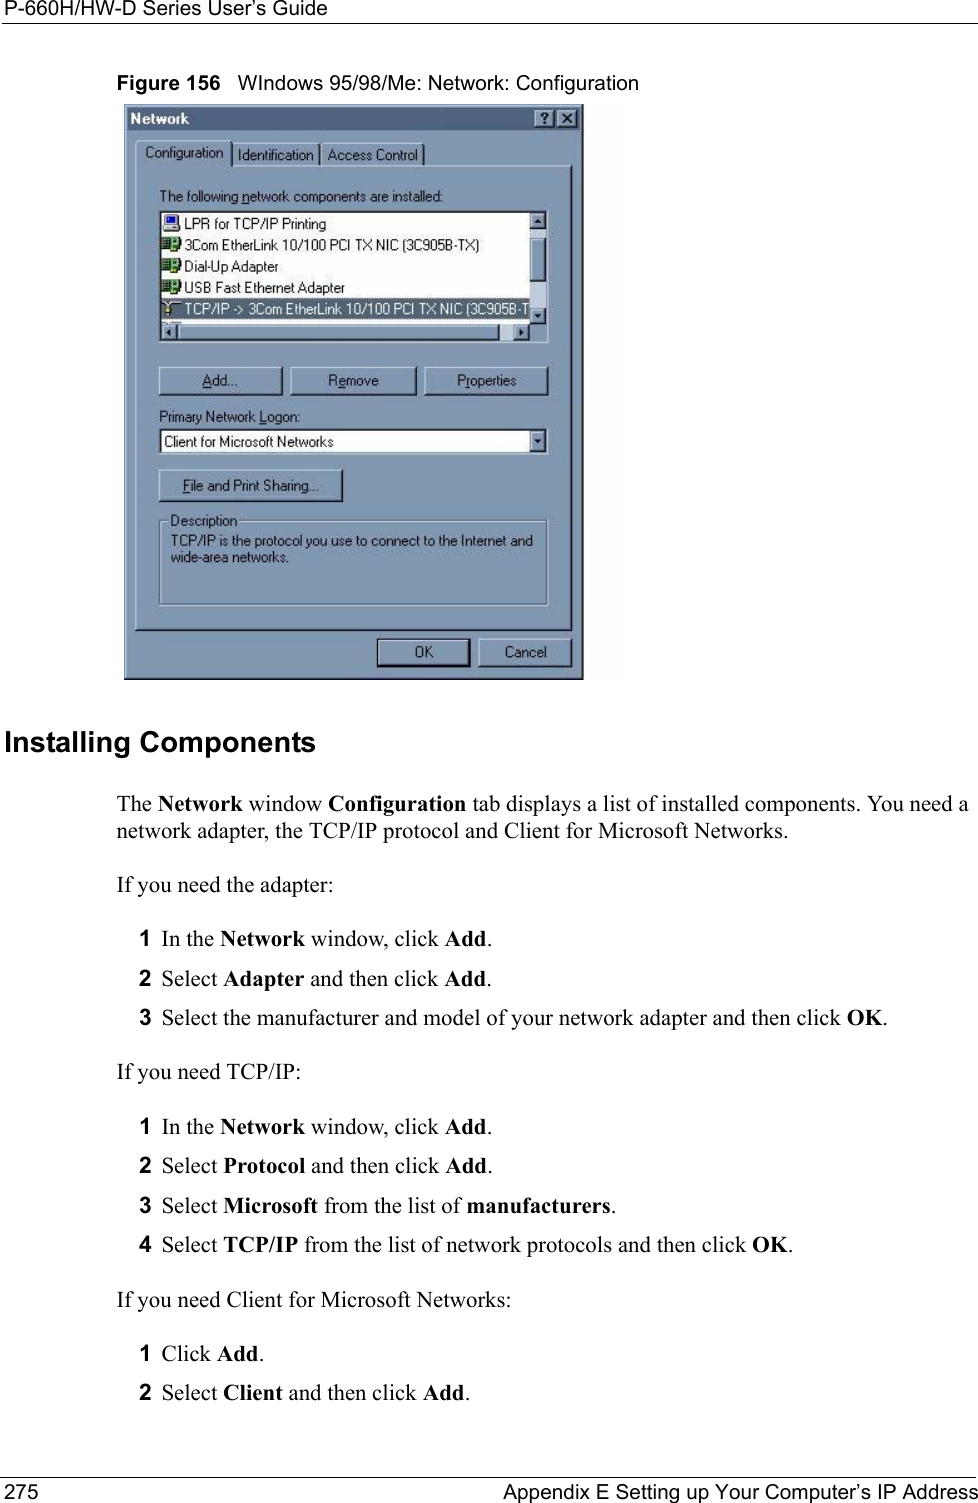 P-660H/HW-D Series User’s Guide275 Appendix E Setting up Your Computer’s IP AddressFigure 156   WIndows 95/98/Me: Network: ConfigurationInstalling ComponentsThe Network window Configuration tab displays a list of installed components. You need a network adapter, the TCP/IP protocol and Client for Microsoft Networks.If you need the adapter:1In the Network window, click Add.2Select Adapter and then click Add.3Select the manufacturer and model of your network adapter and then click OK.If you need TCP/IP:1In the Network window, click Add.2Select Protocol and then click Add.3Select Microsoft from the list of manufacturers.4Select TCP/IP from the list of network protocols and then click OK.If you need Client for Microsoft Networks:1Click Add.2Select Client and then click Add.